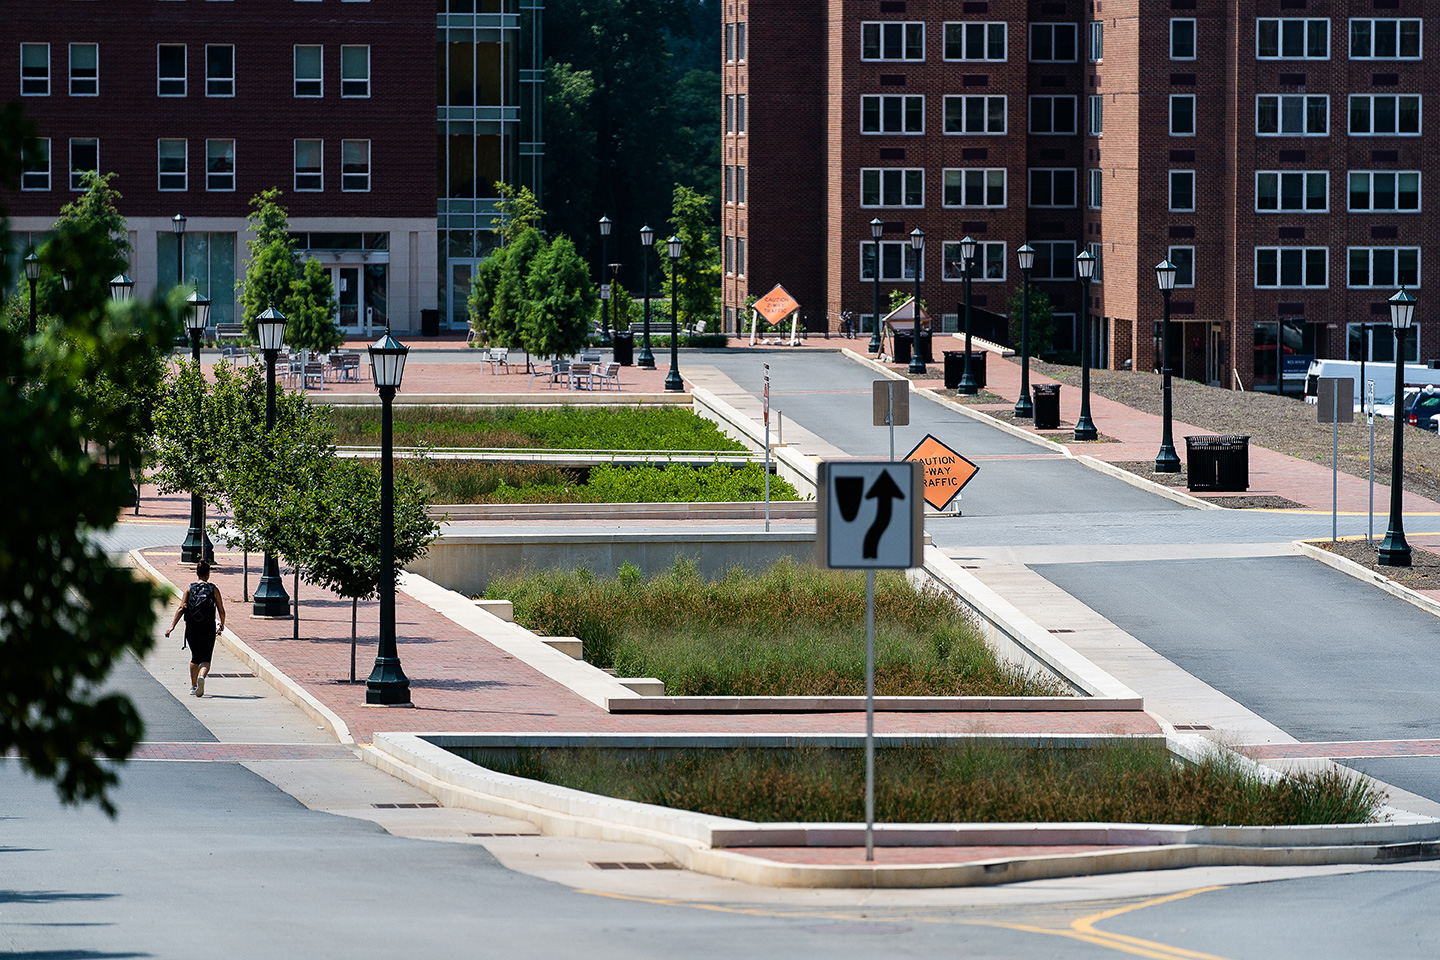 The Brandon Avenue District’s stormwater management project was recognized as an award-winner by ACEC Virginia, the Chesapeake Stormwater Network, and ENR MidAtlantic. Photo courtesy of Dewberry.